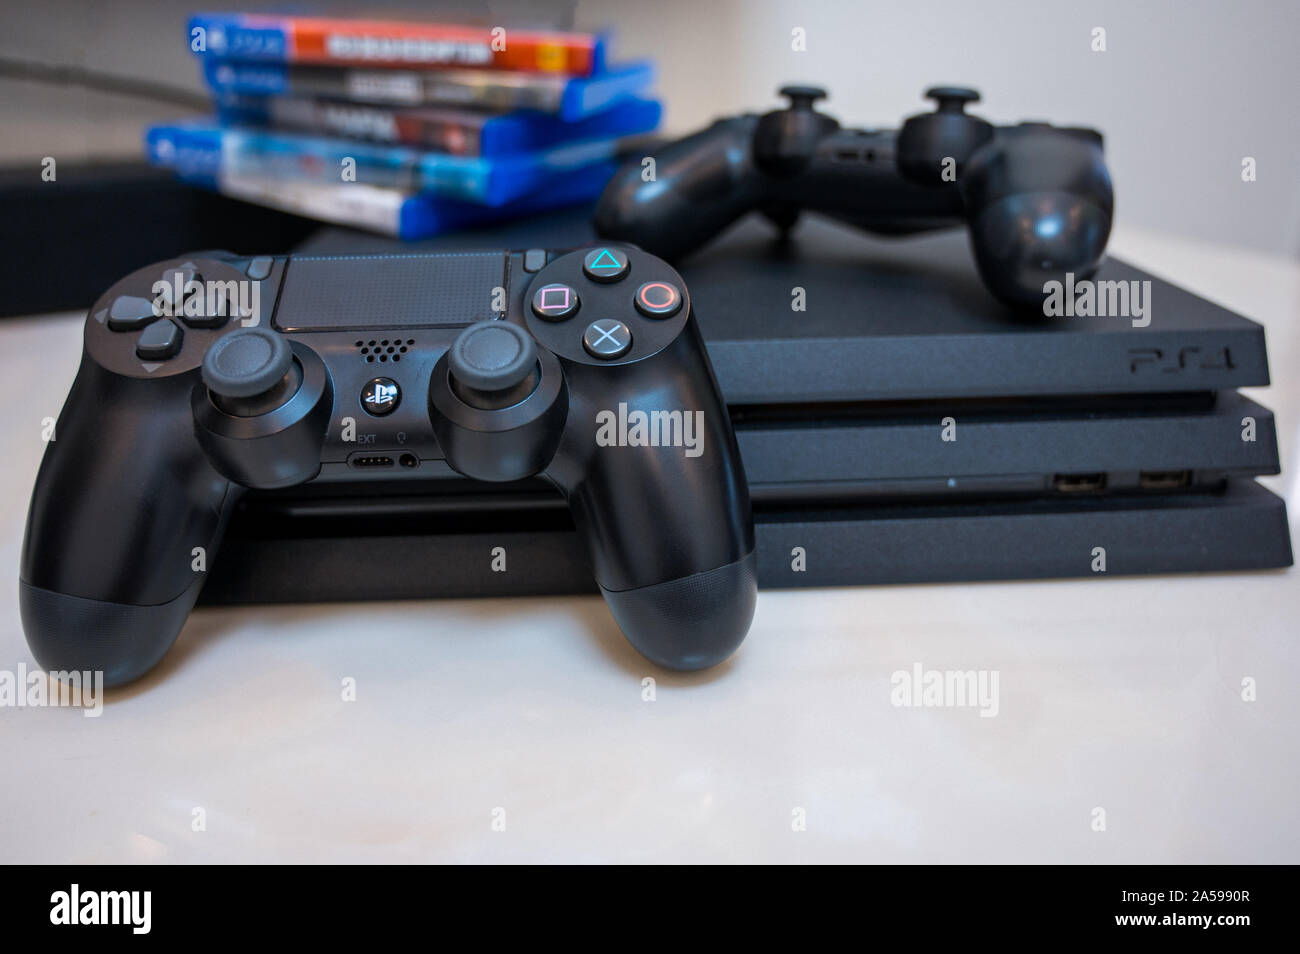 Sony Play Station 4 Pro gaming console on the table with two joysticks and  some games on DVD for PS4 Stock Photo - Alamy